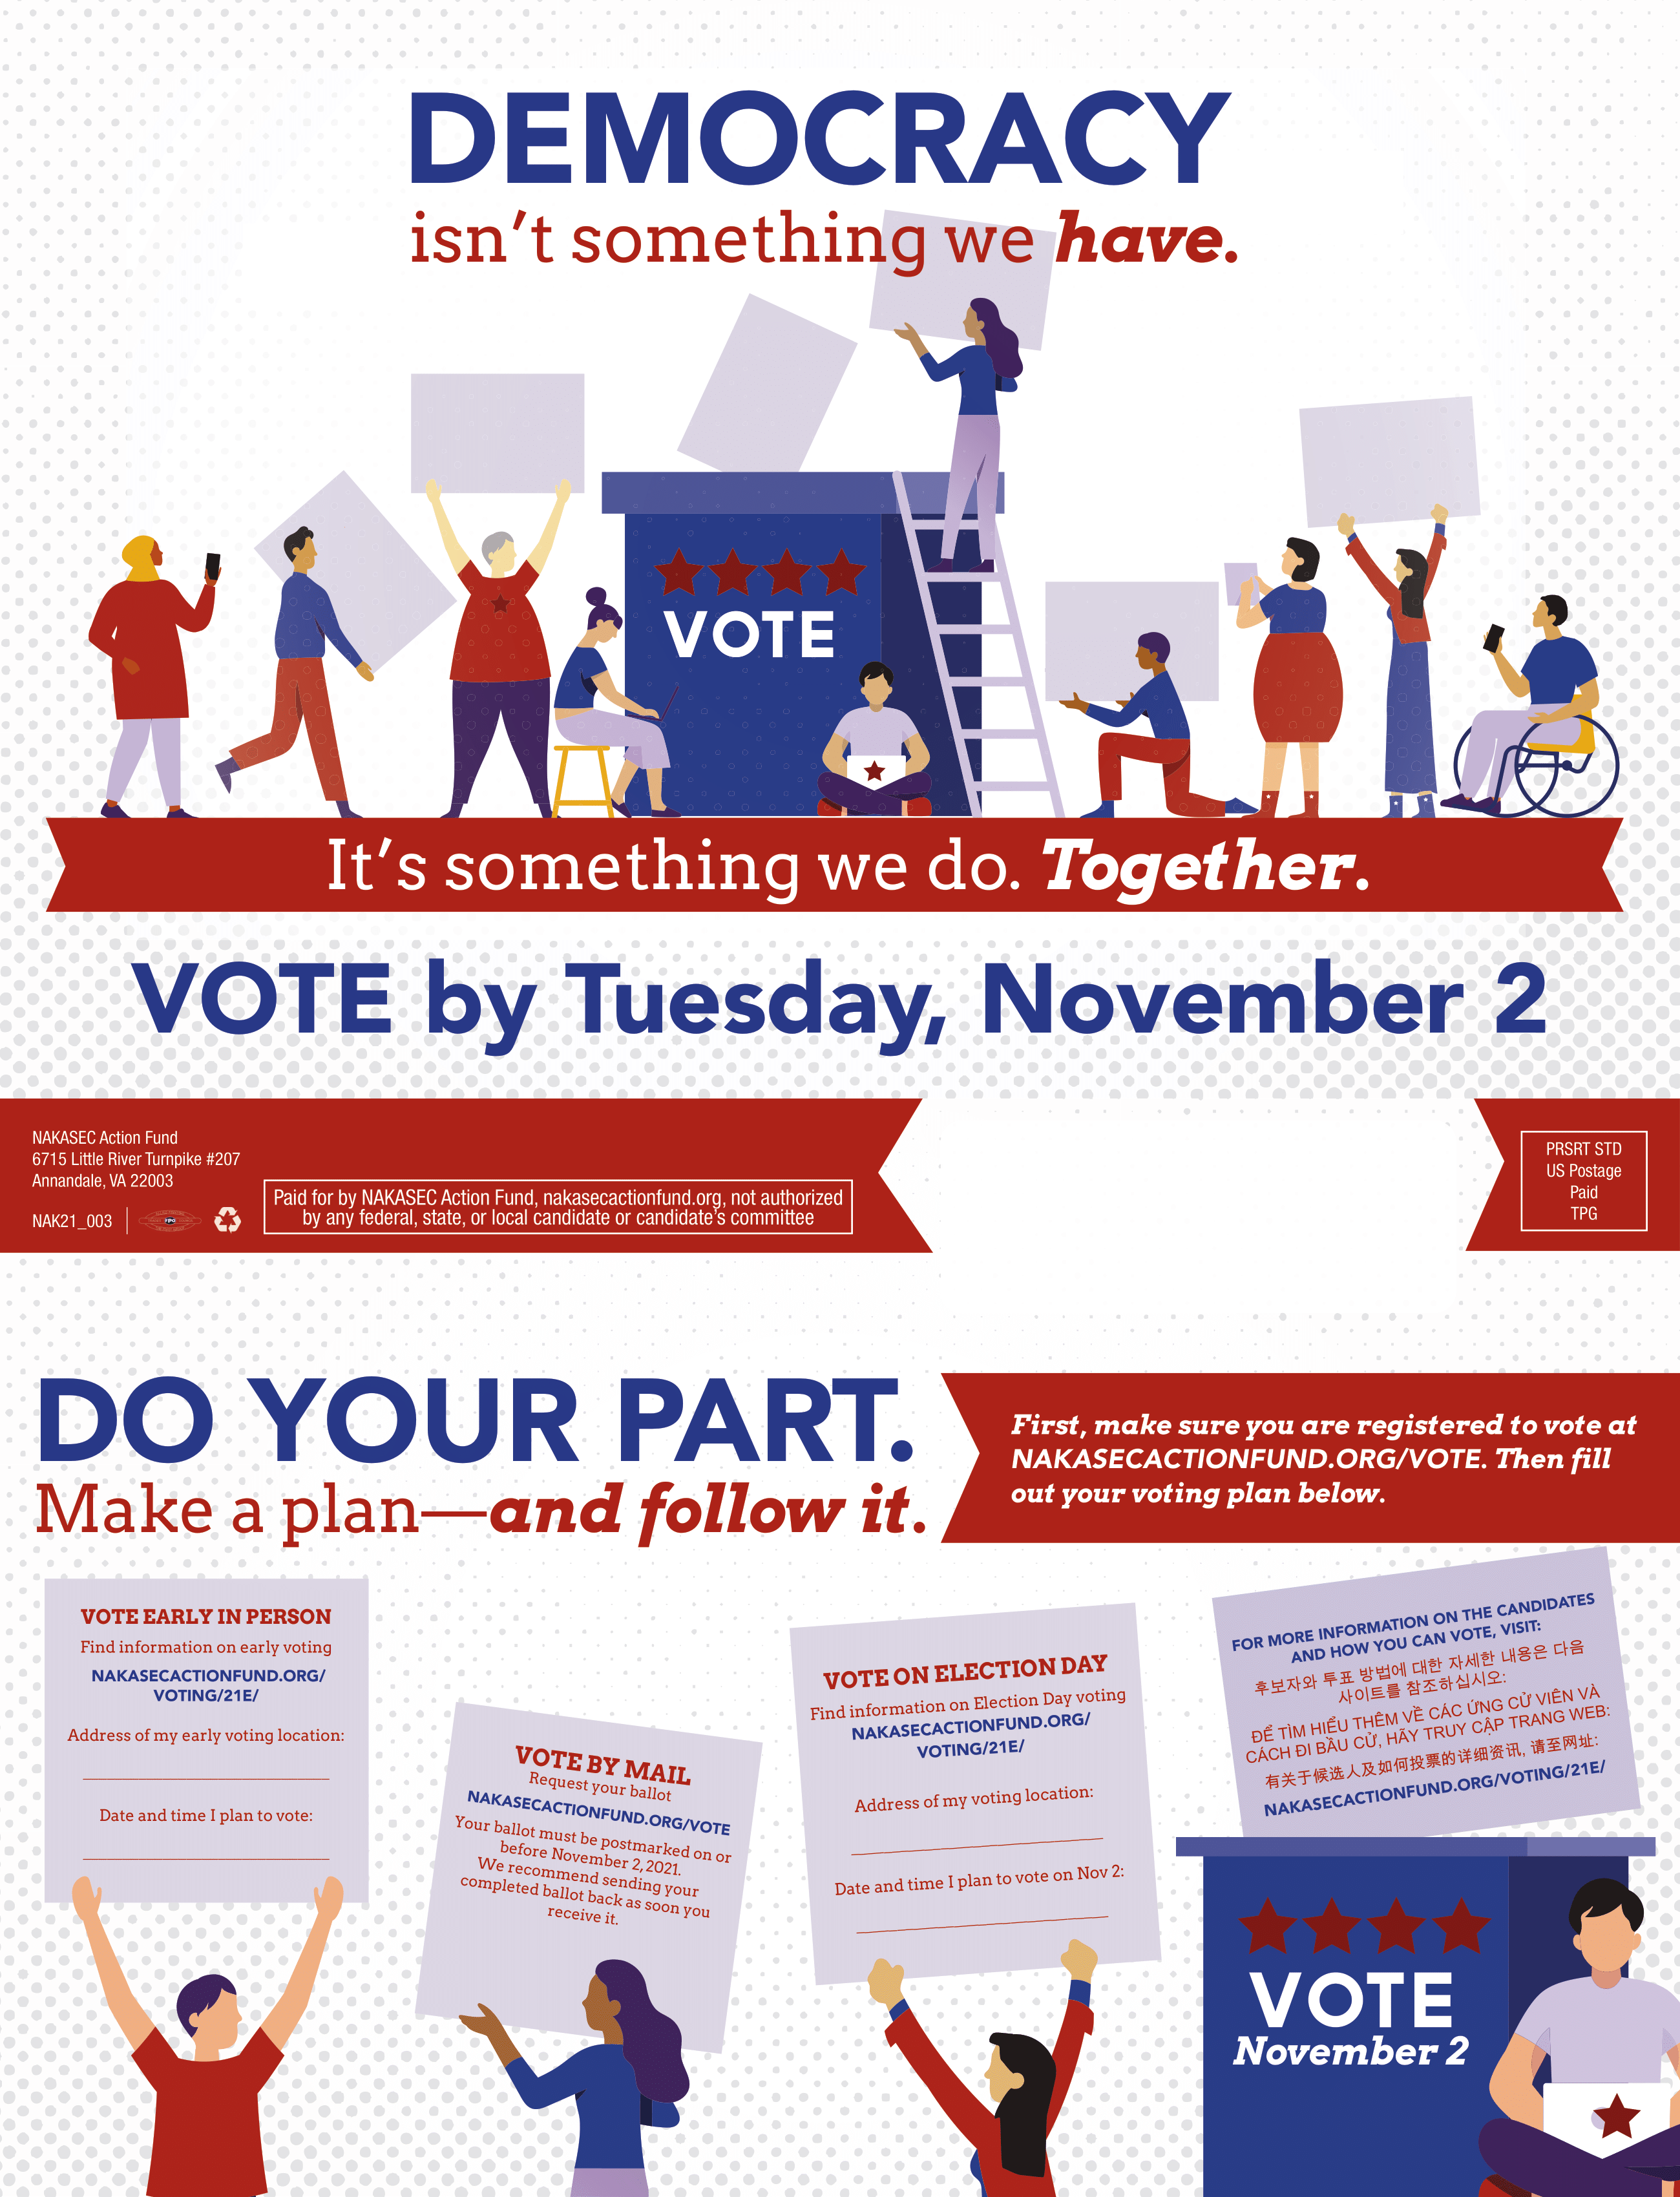 Democracy isn't something we have. It's something we do. Together. VOTE by Tuesday, November 2!